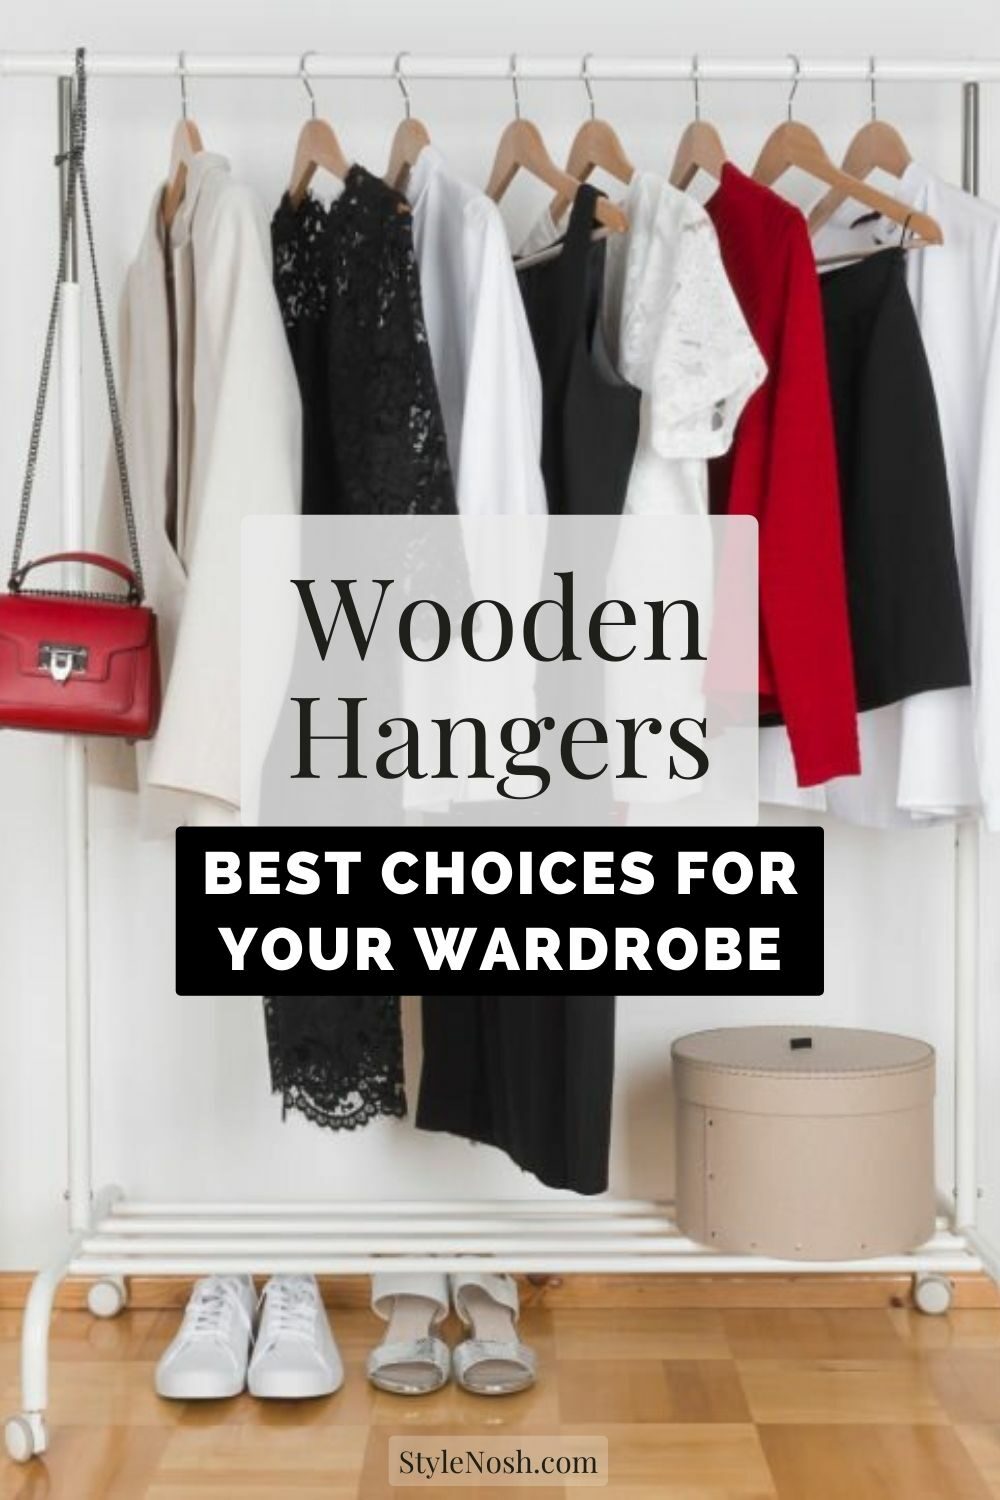 Are Wooden Hangers Really Better